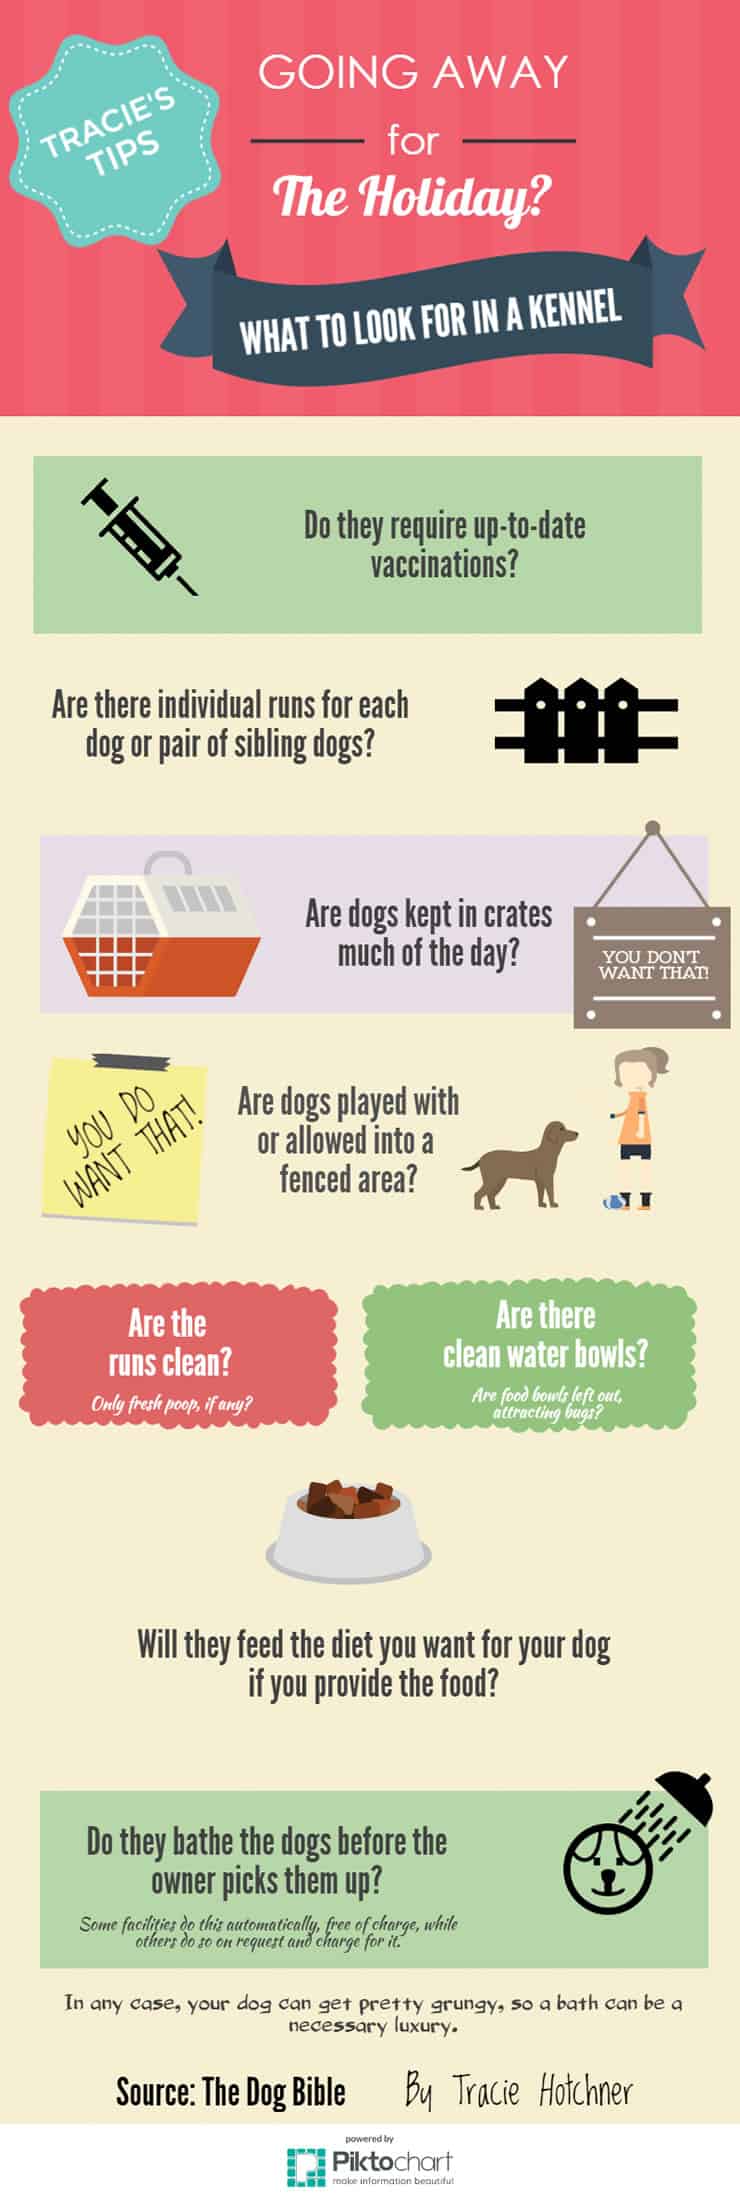 What To Look For In A Kennel (Infographic)